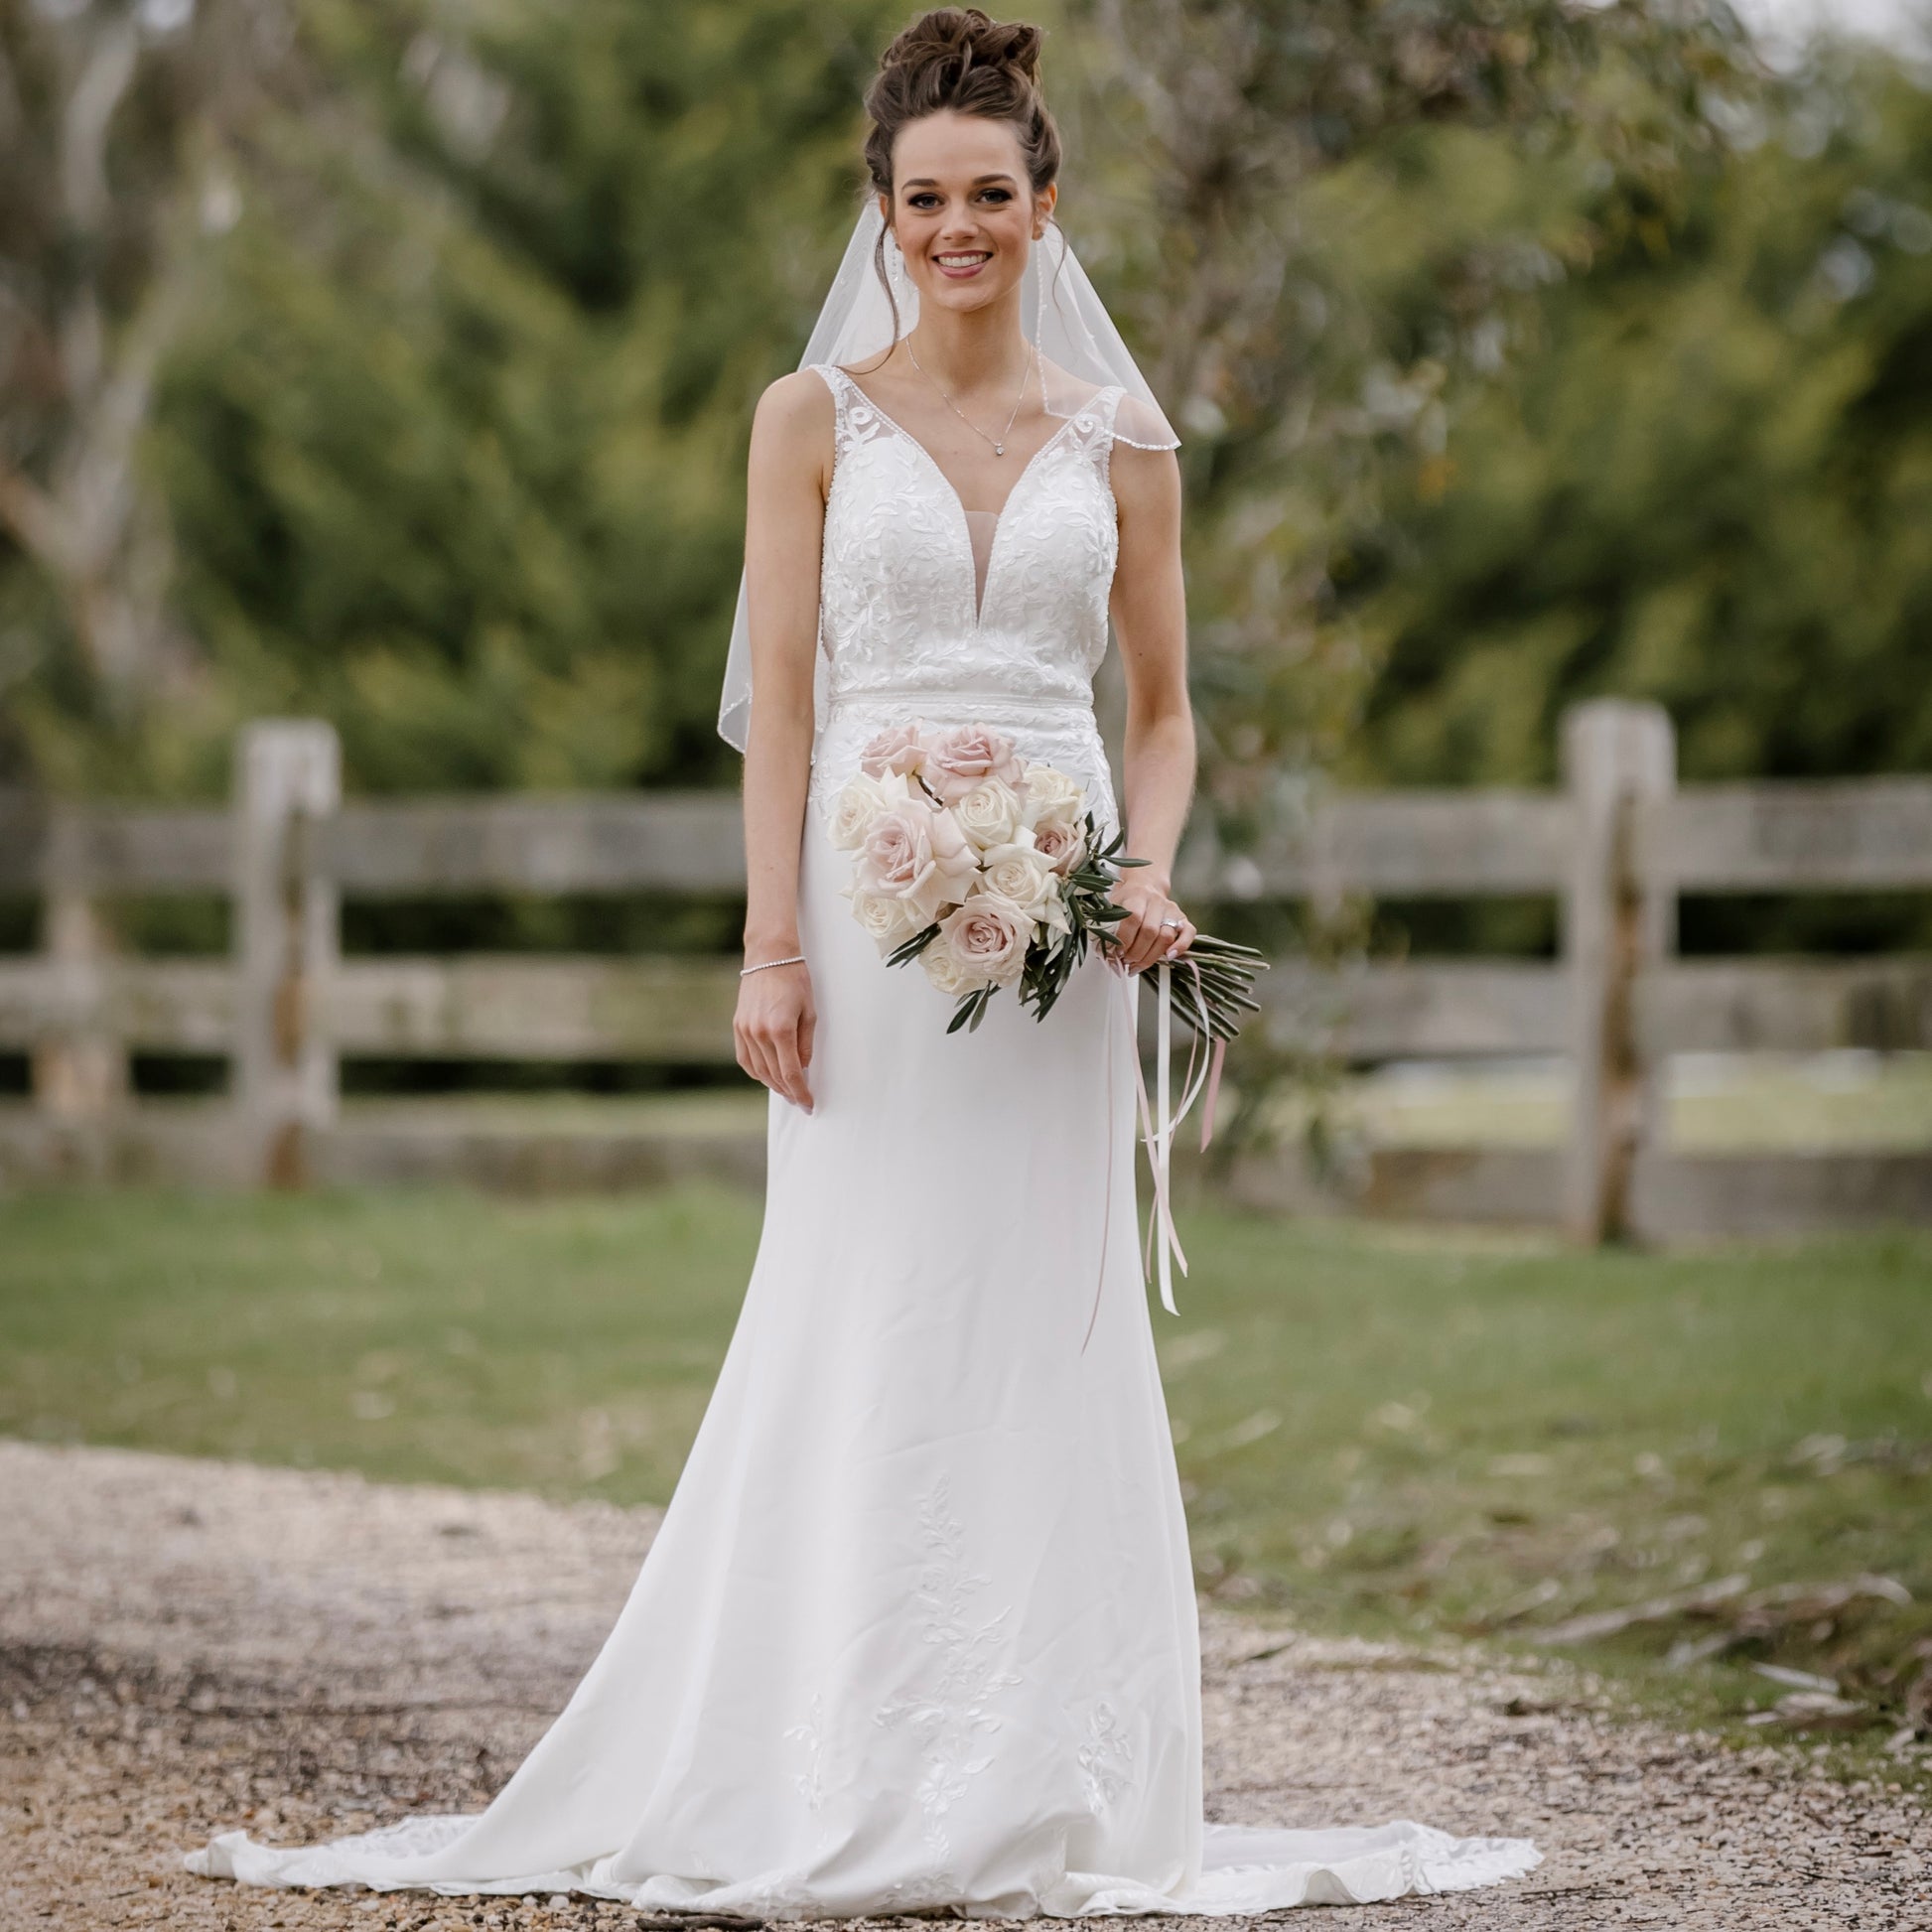 "A stunning Venus Wedding Gown inspired by the romantic charm of Venice. The gown features a plunging neckline with delicate tulle illusion insert and intricate beadwork. The fit and flare silhouette flatters the bride's curves, while lace details adorn the hem. The back showcases a V-neckline with covered buttons, and illusion skintone tulle inserts add a subtly sexy touch. The gown is completed with a chapel train, creating a breathtaking bridal look."